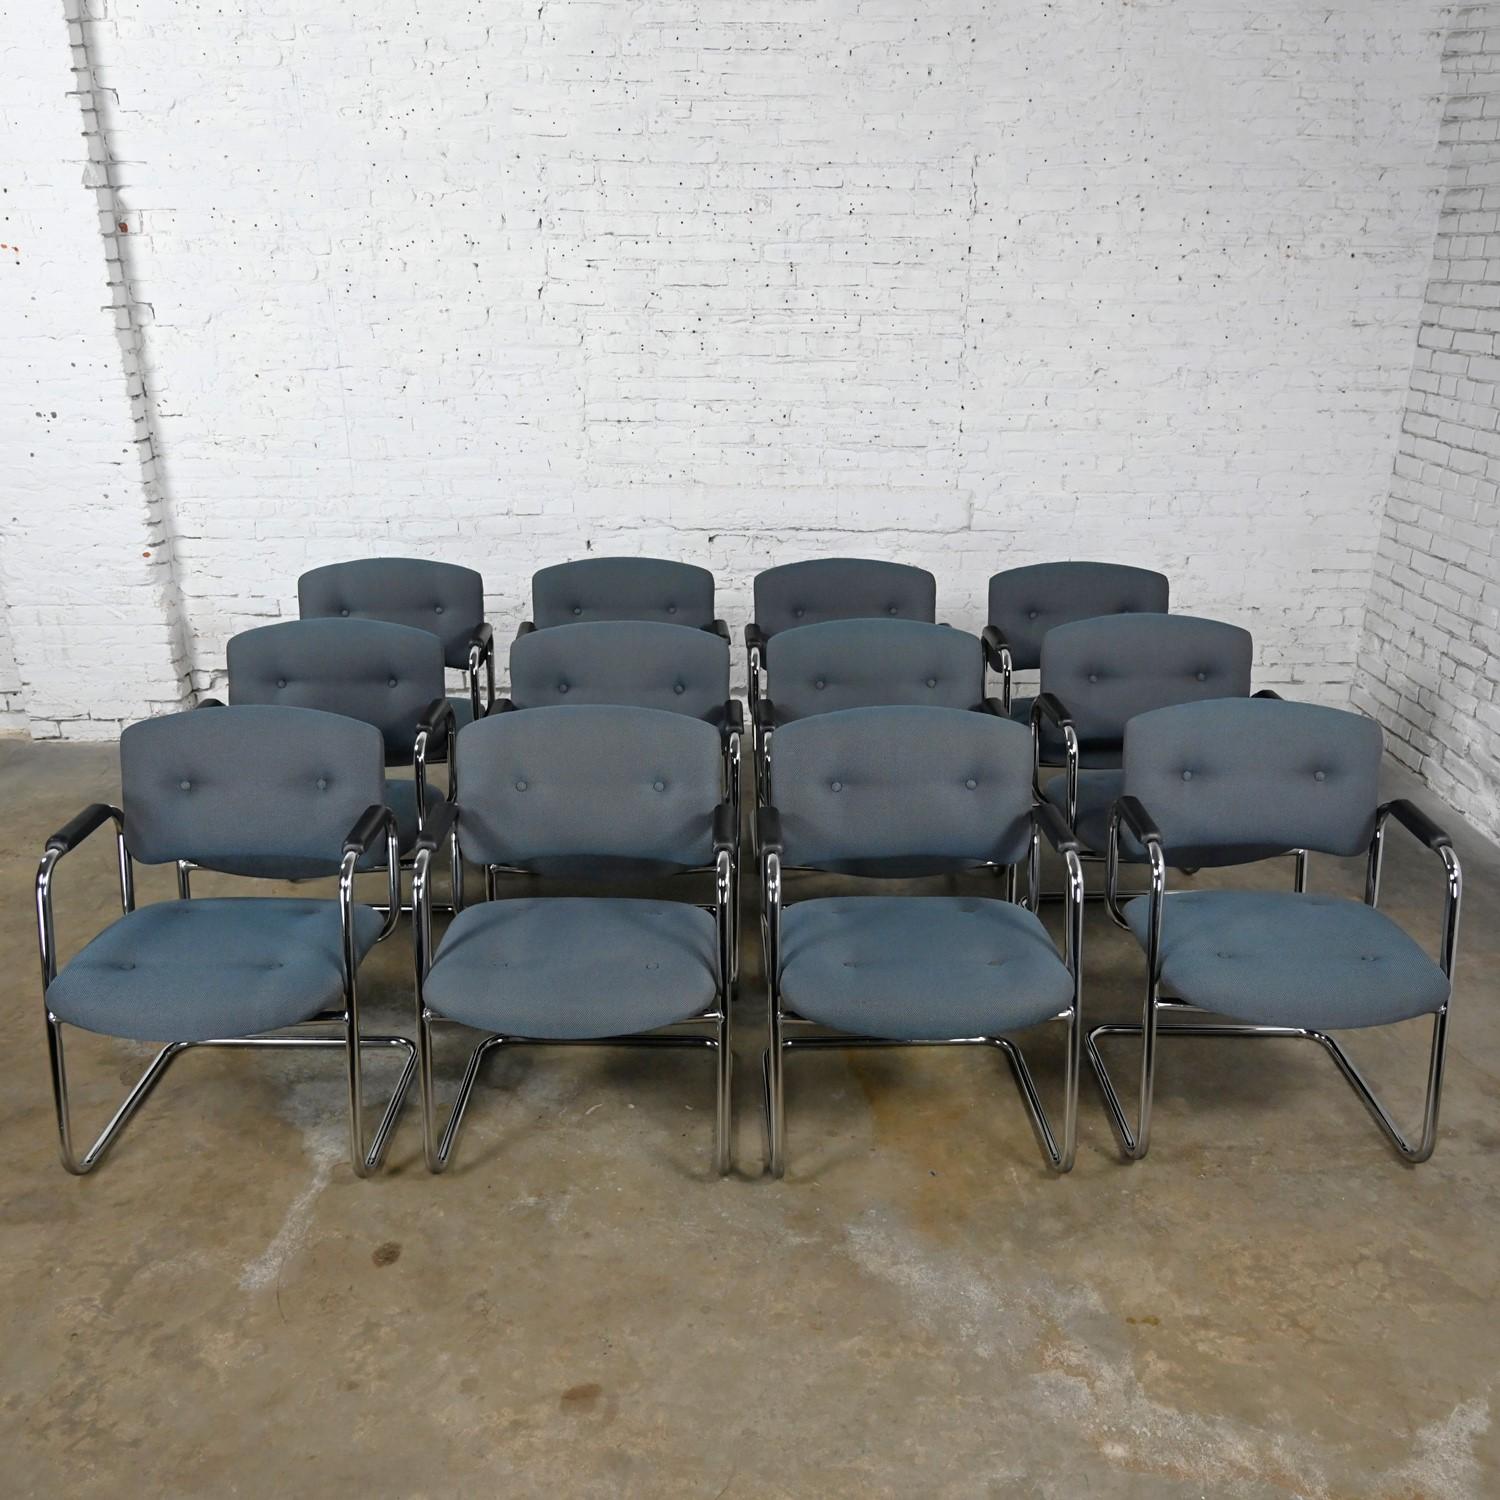 Late 20th Century Gray & Chrome Cantilever Chairs Style Steelcase Set of 12 For Sale 8